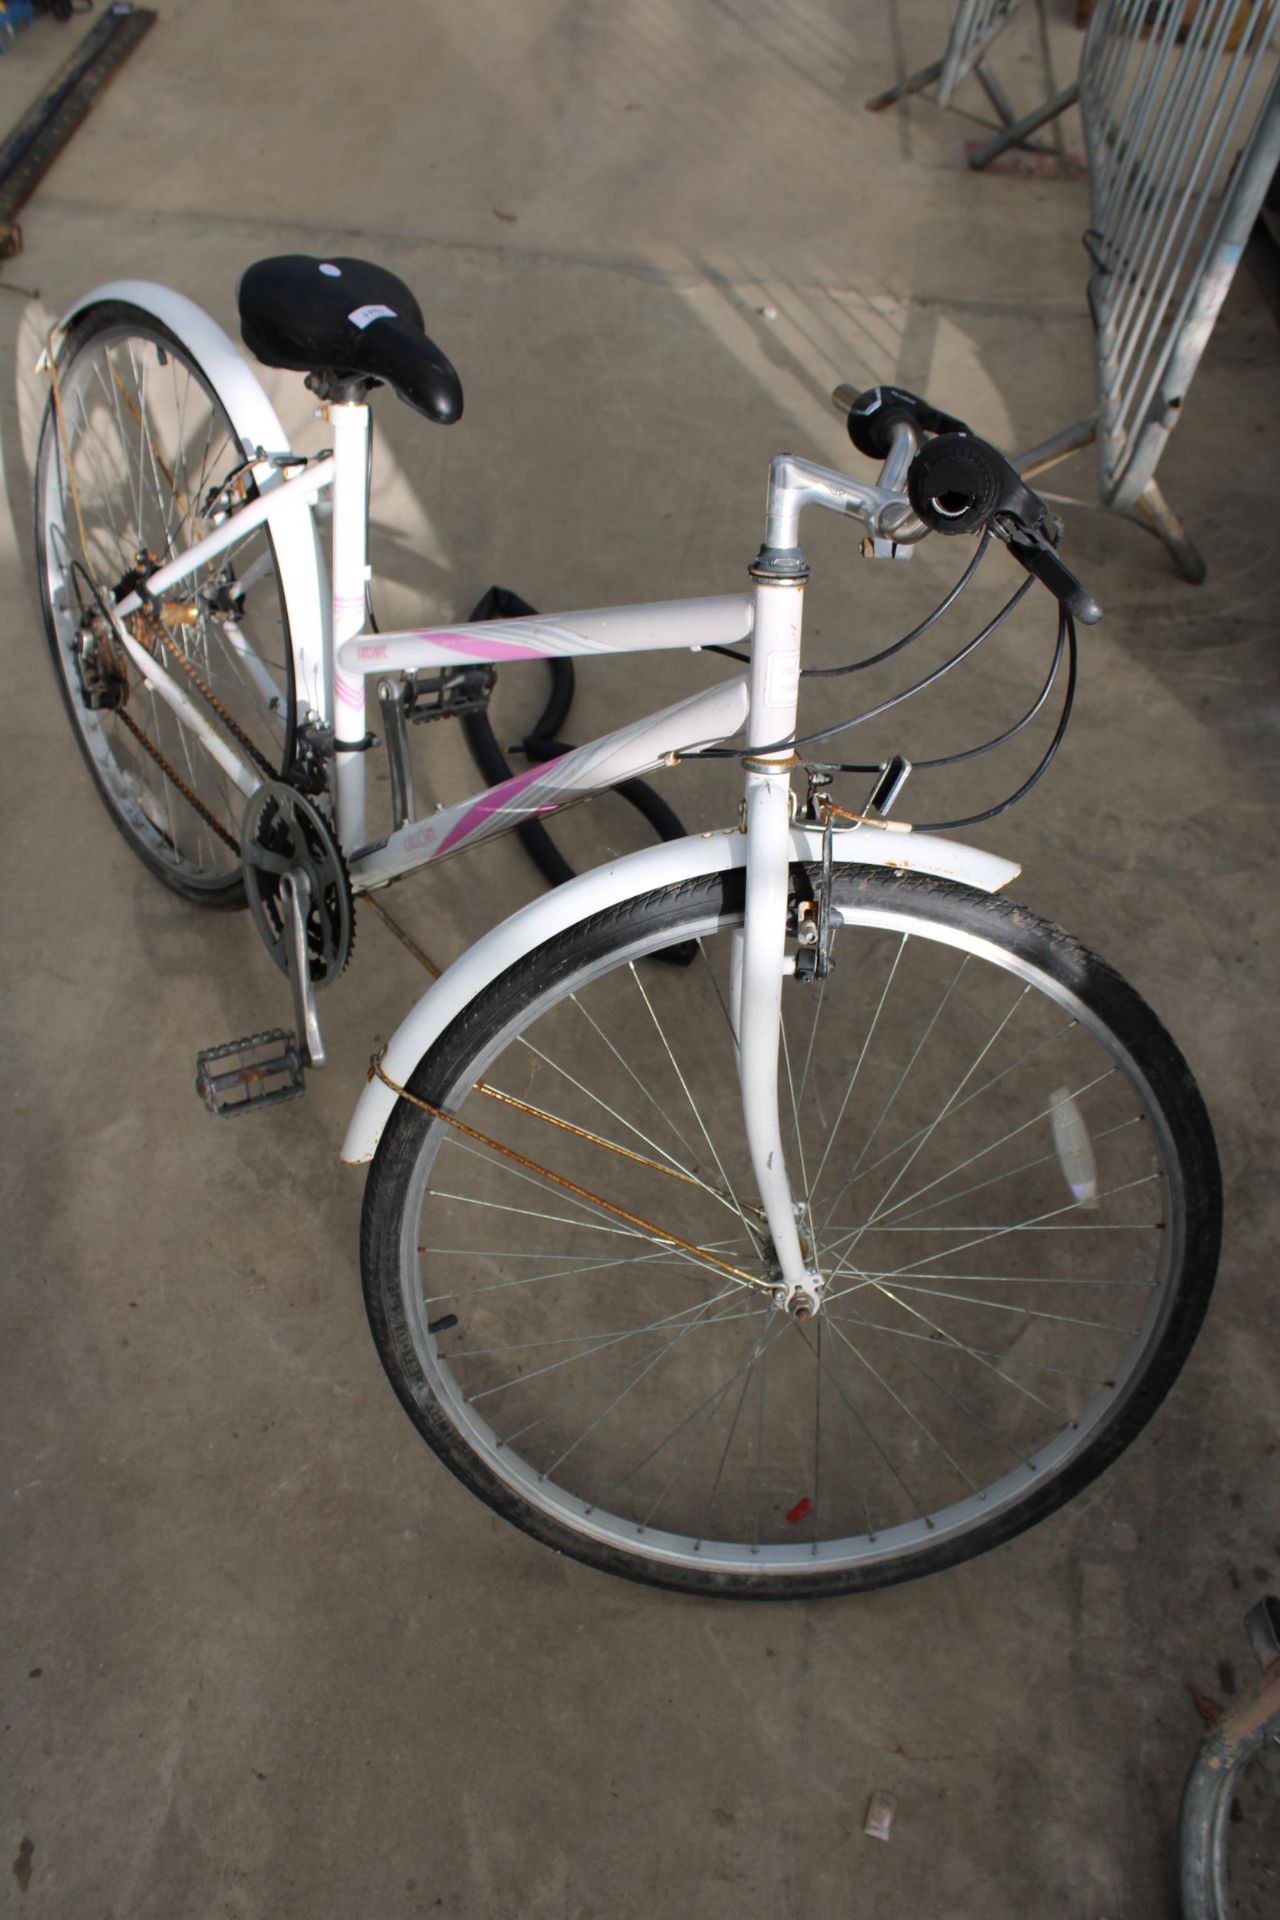 A DISCOVER FREESPIRIT LADIES BIKE WITH 18 SPEED SHIMANO GEAR SYSTEM - Image 4 of 4